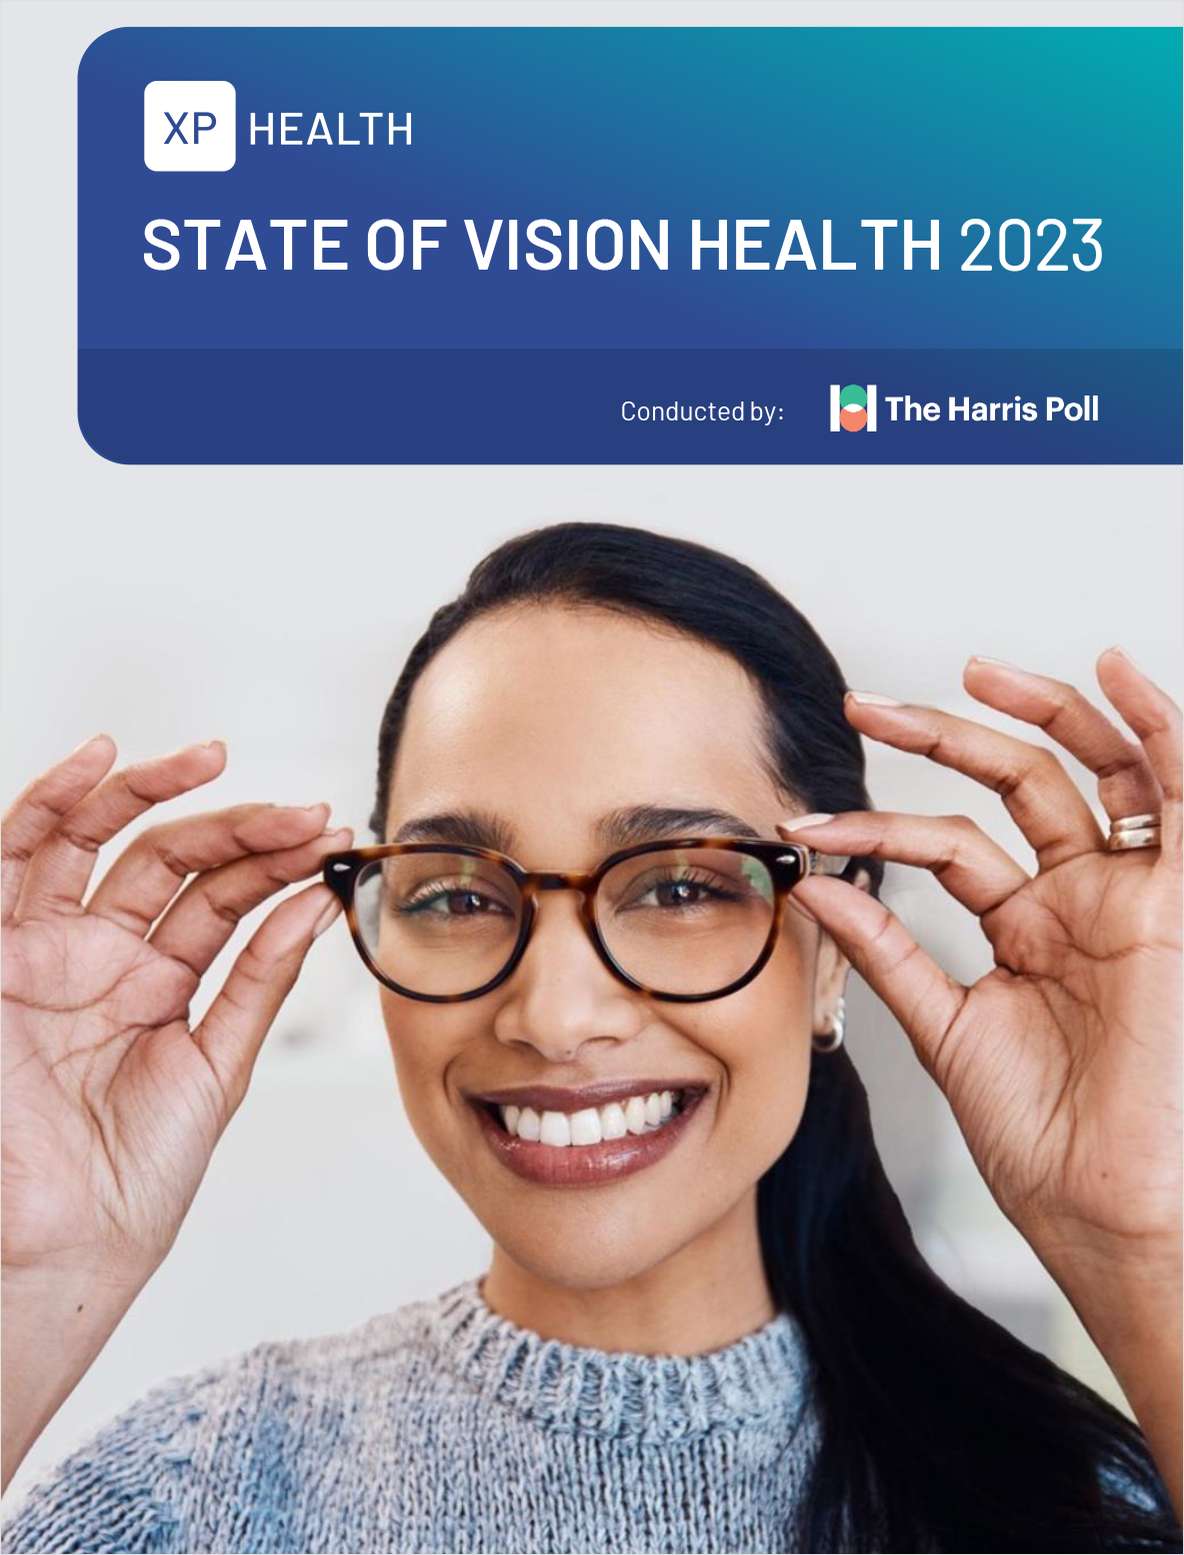 The State of Vision Health 2023